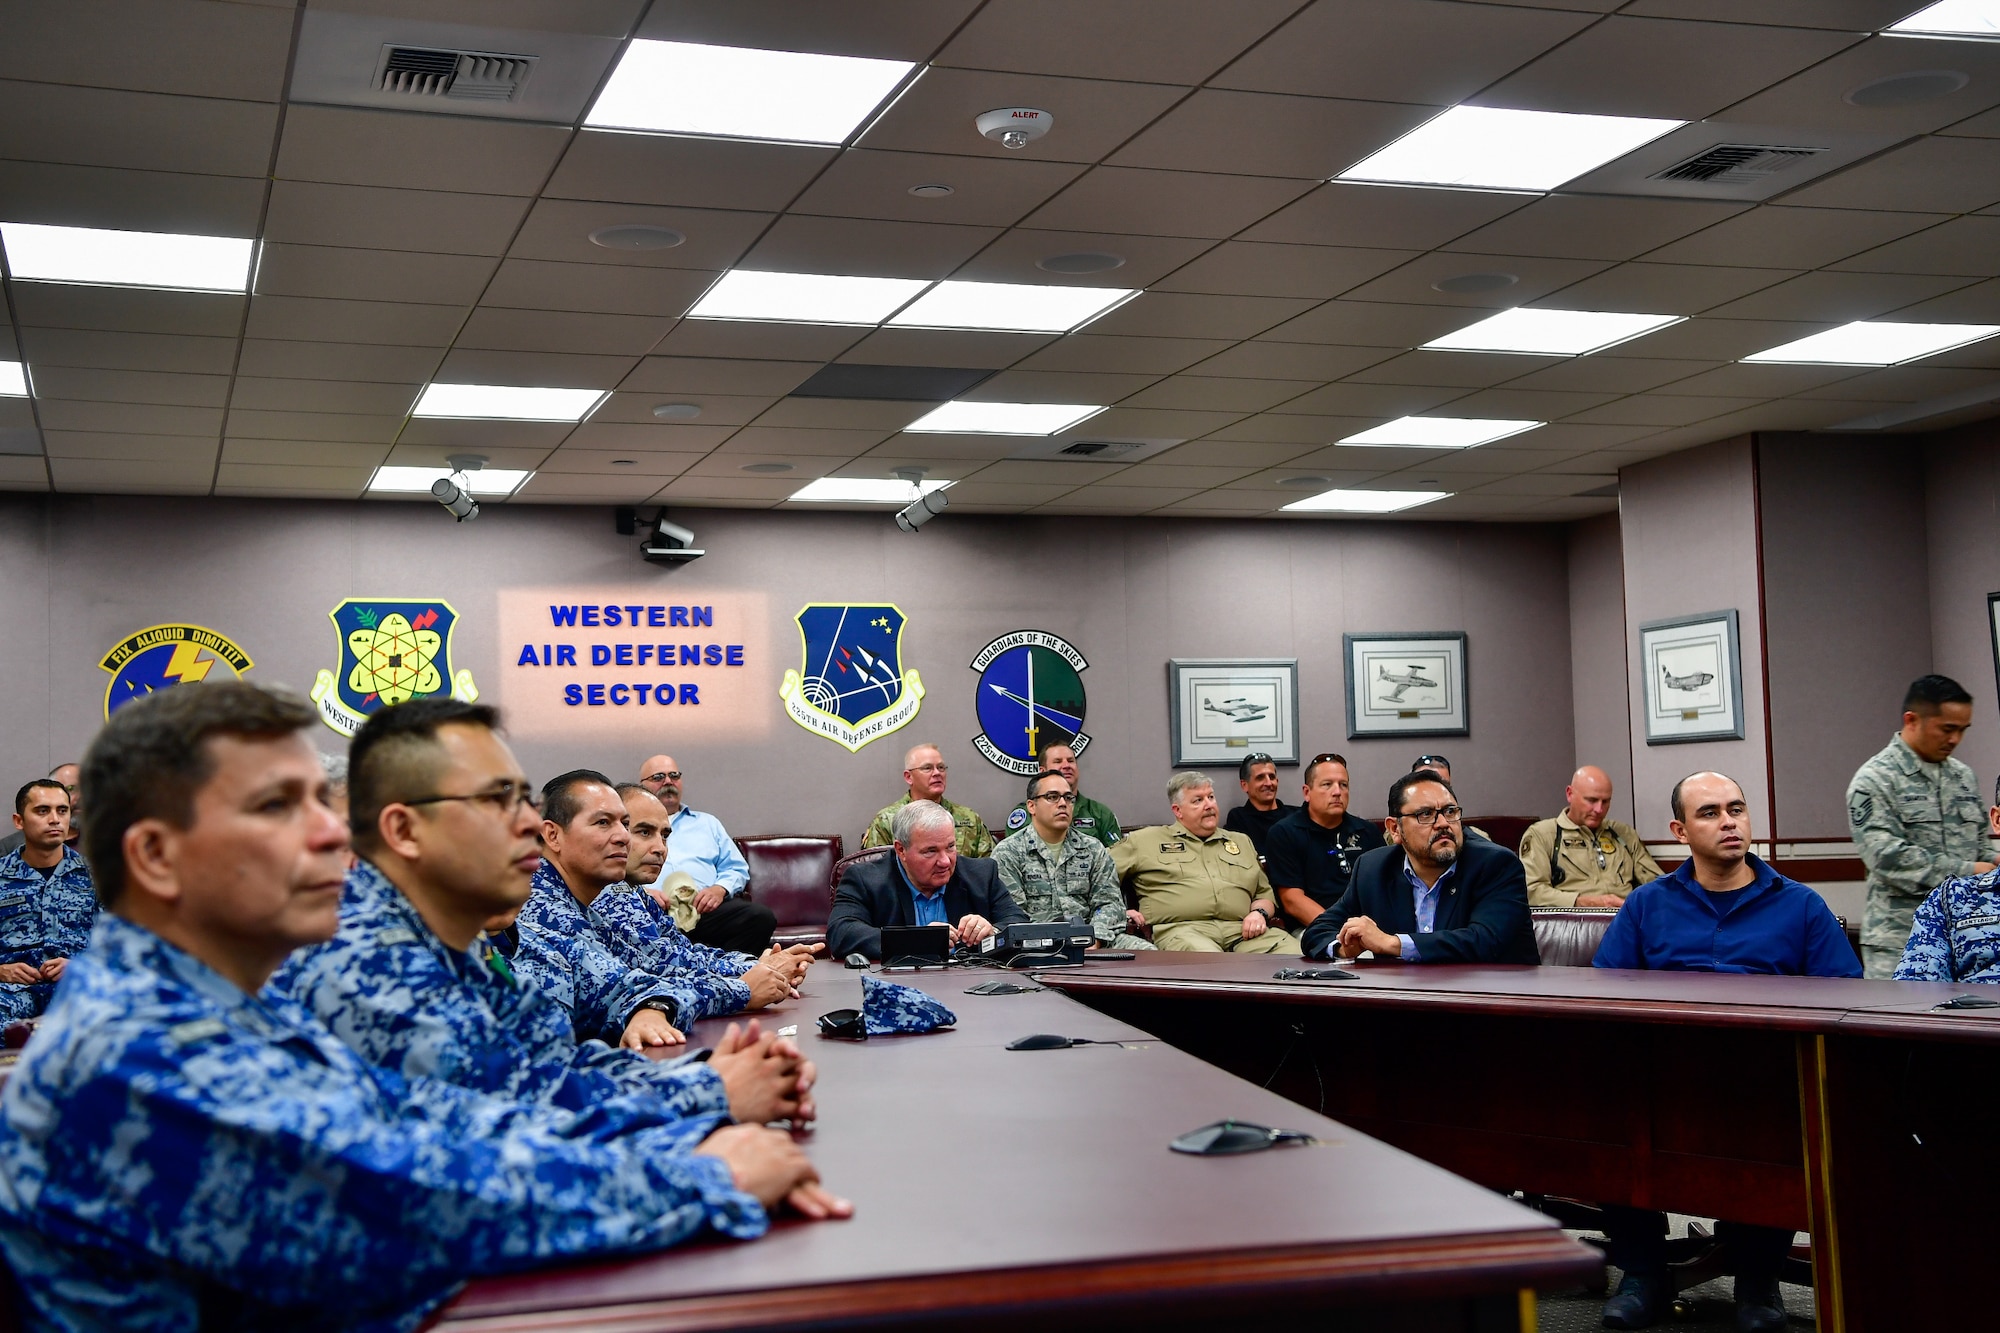 AMALGAM EAGLE 18 exercise planners from the Mexican Air Force, U.S. Air Force, Air National Guard, U.S. Customs and Border Protection, and U.S. Army receive a Western Air Defense Sector mission briefing May 22, 2018.  AMALGAM EAGLE 18 is a tactical exercise which is designed to enhance mutual warning and information sharing procedures in support of a cooperative response to illicit flights that cross the U.S.-Mexico border.